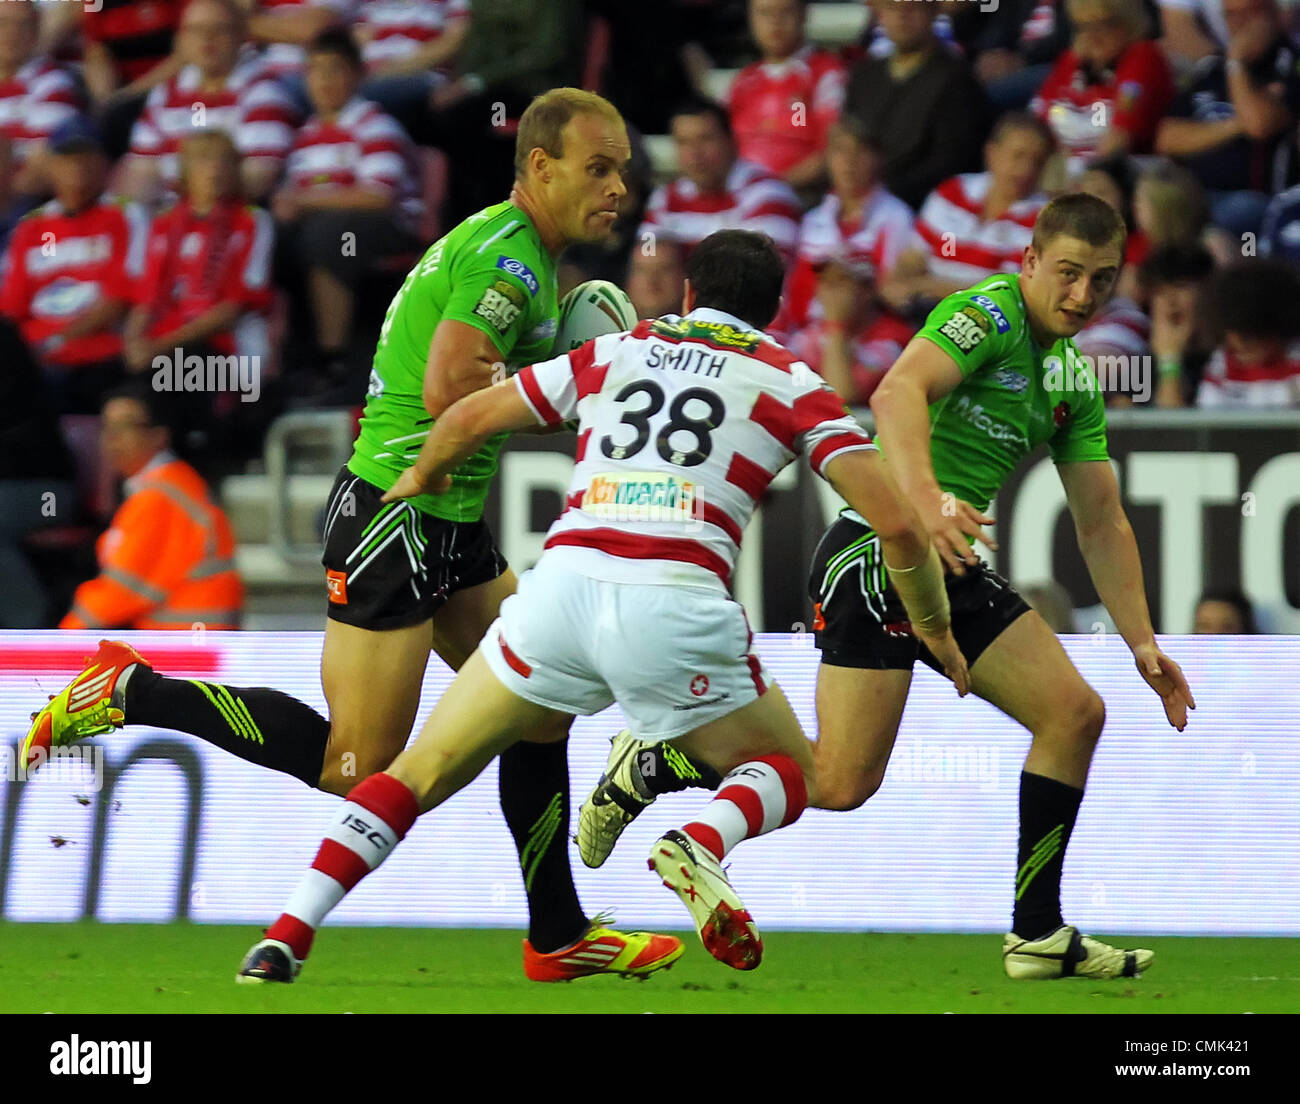 20.08.2012 Wigan, England. Rugby League. Wigan Warriors v Salford City Reds. Salford City Reds Australian Stand Off Daniel Holdsworth and Wigan Warriors English Stand Off Matty Smith  in action during the Stobart Super League game played at the DW Stadium. Stock Photo